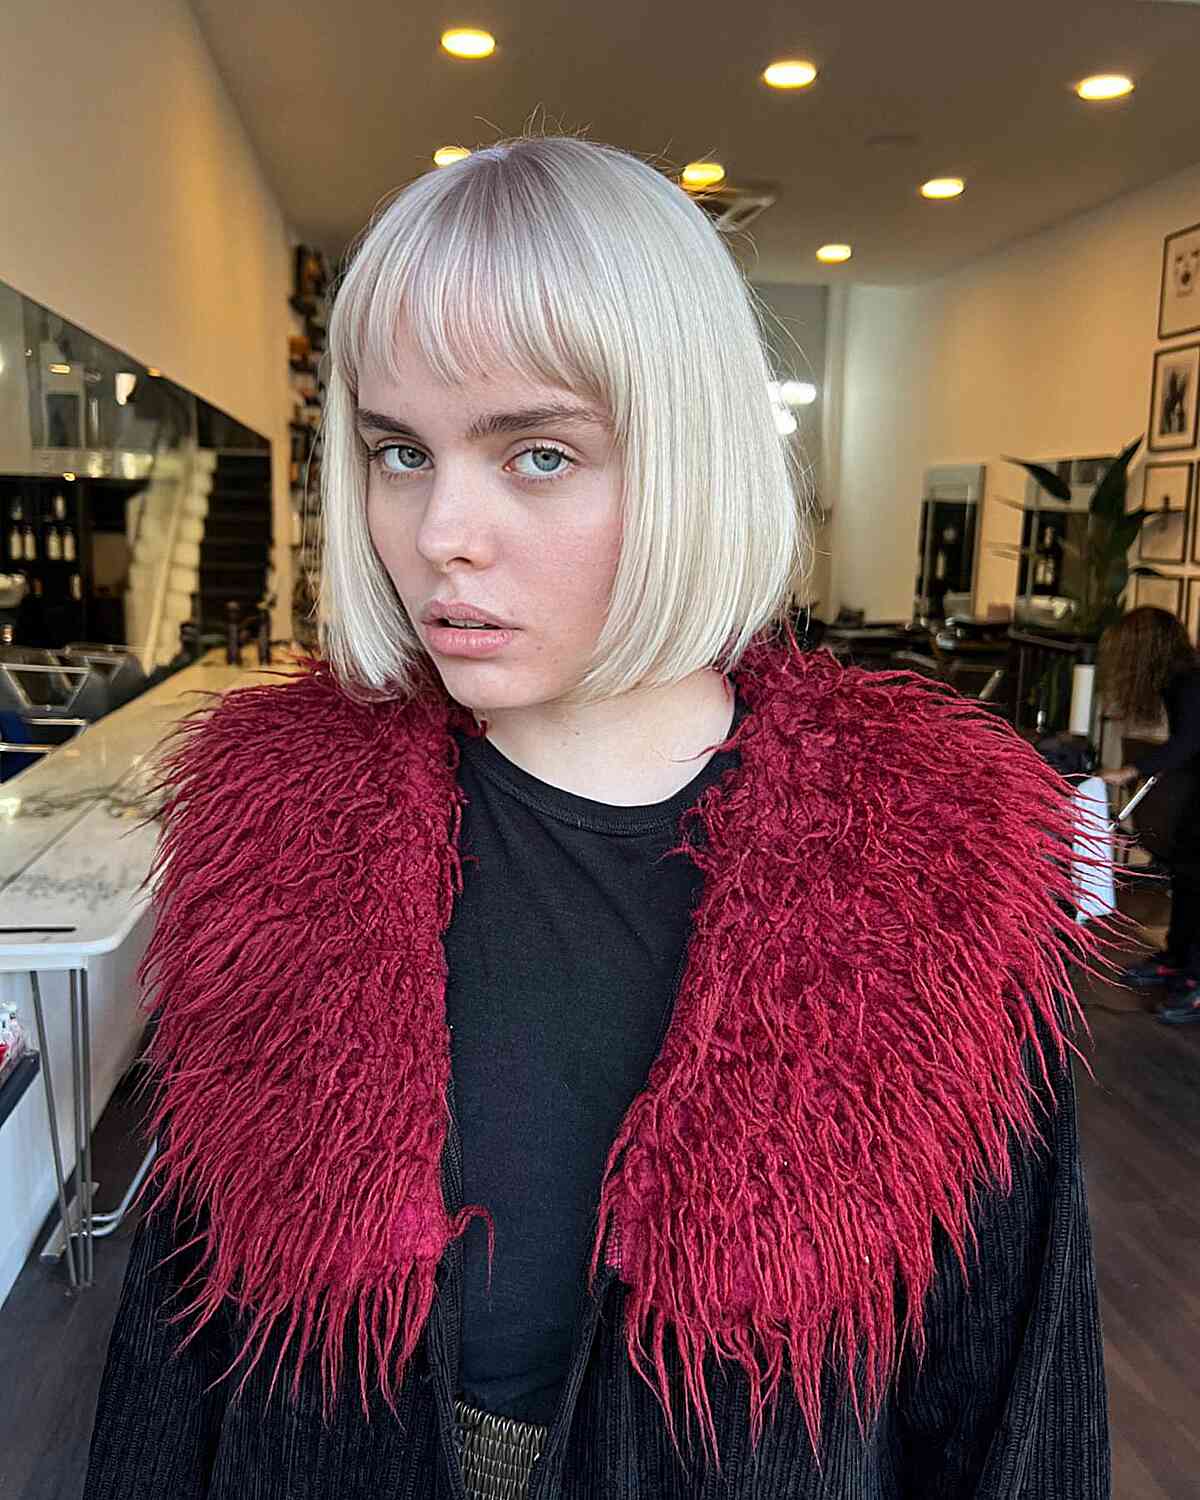 Medium to Short Bob with Subtle Layers and Bangs for Oval Face Shapes with White-Blonde Color